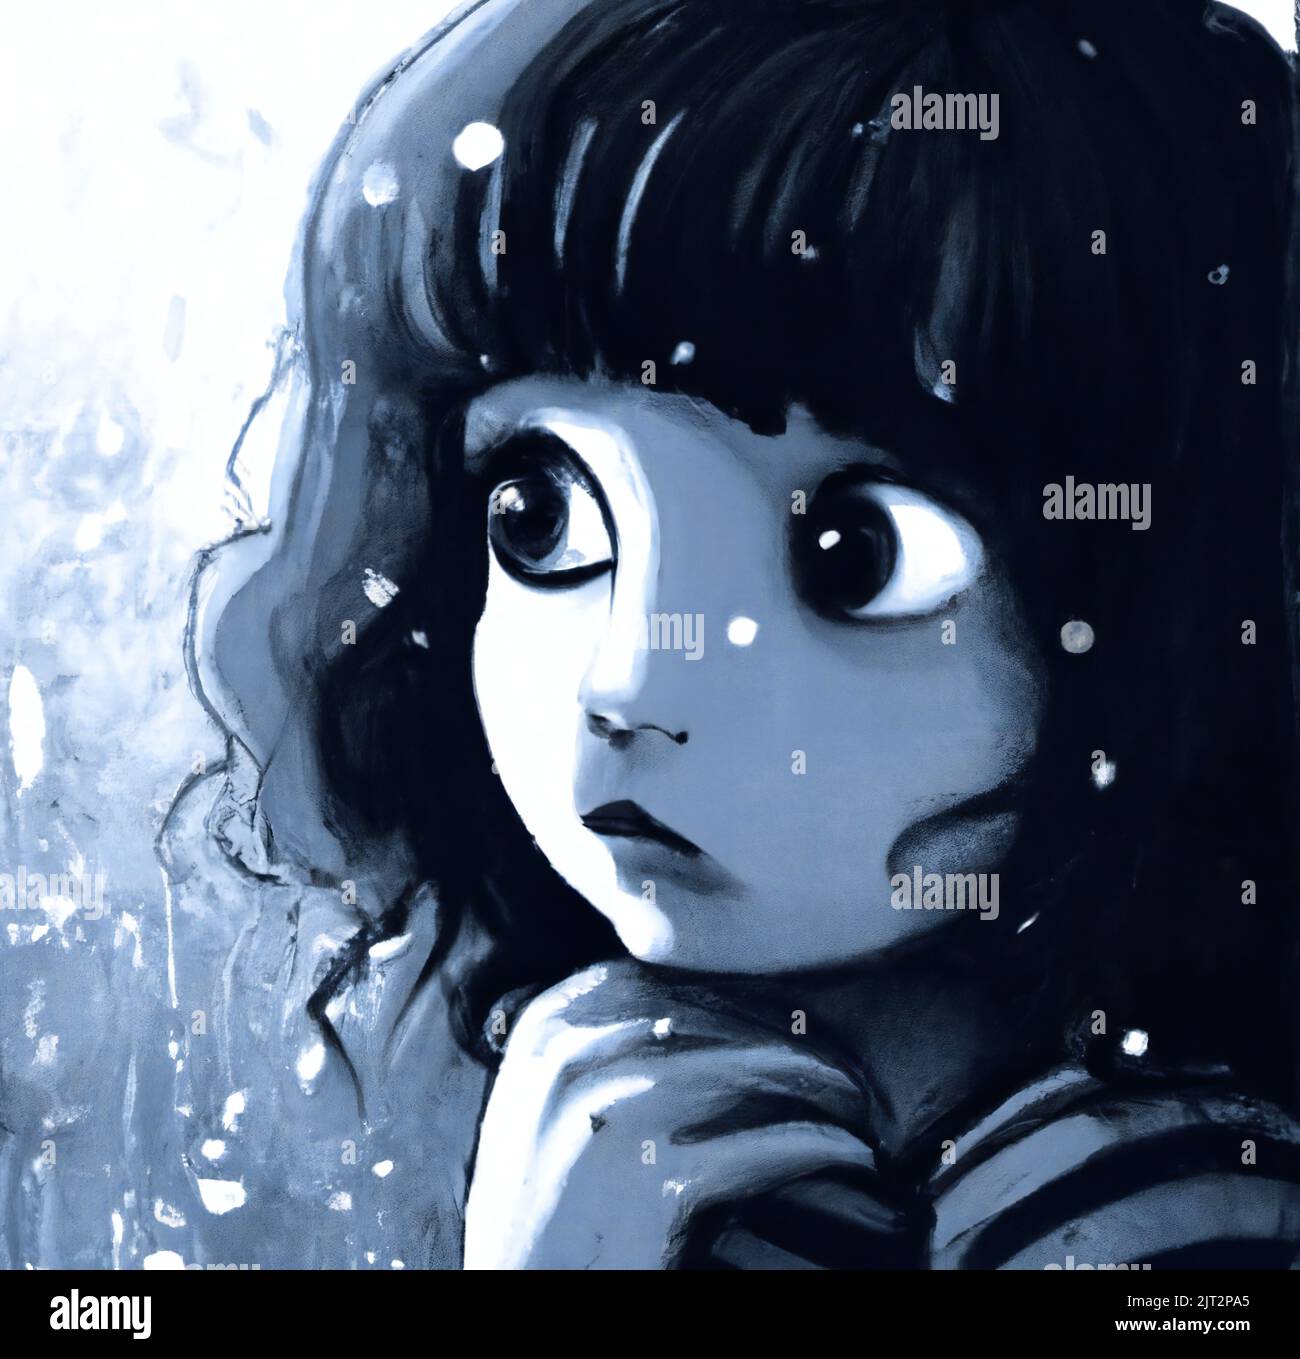 Digital art rendering of a young girl sitting alone in the cold winter. She  is scared, freezing, and feeling alone and helpless Stock Photo - Alamy